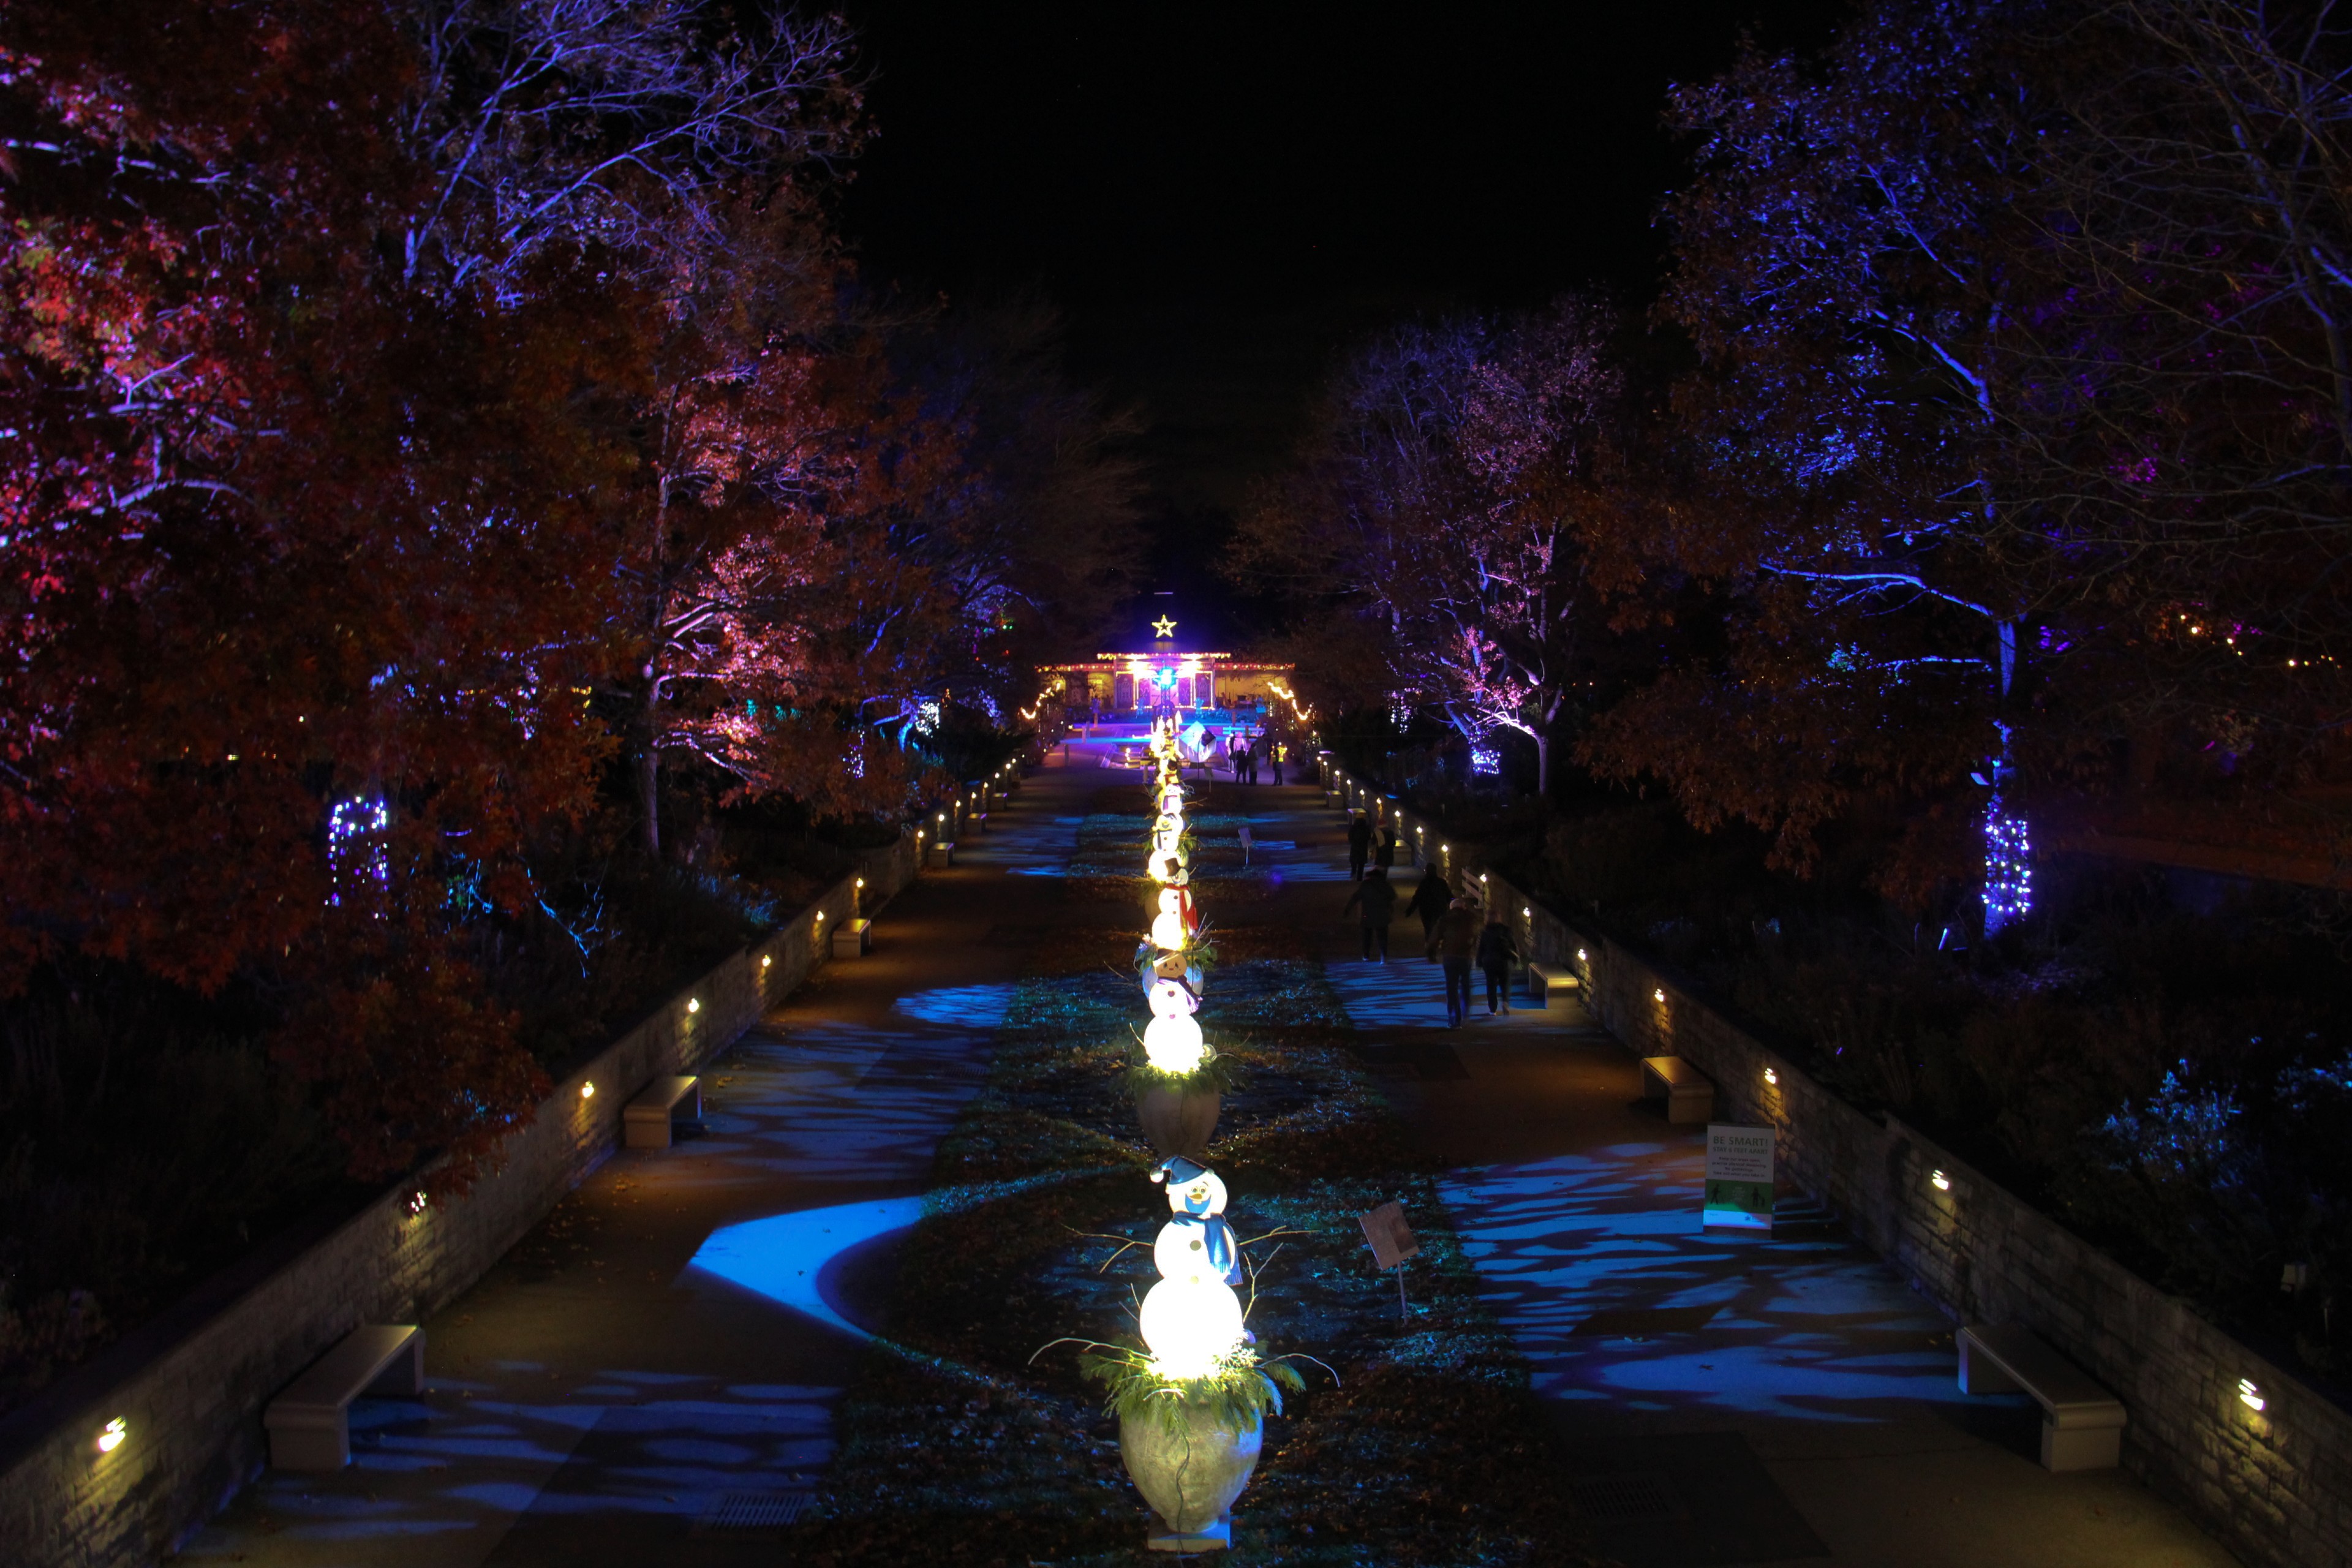 View of RBG Oak Alley with festive holiday lights and displays.